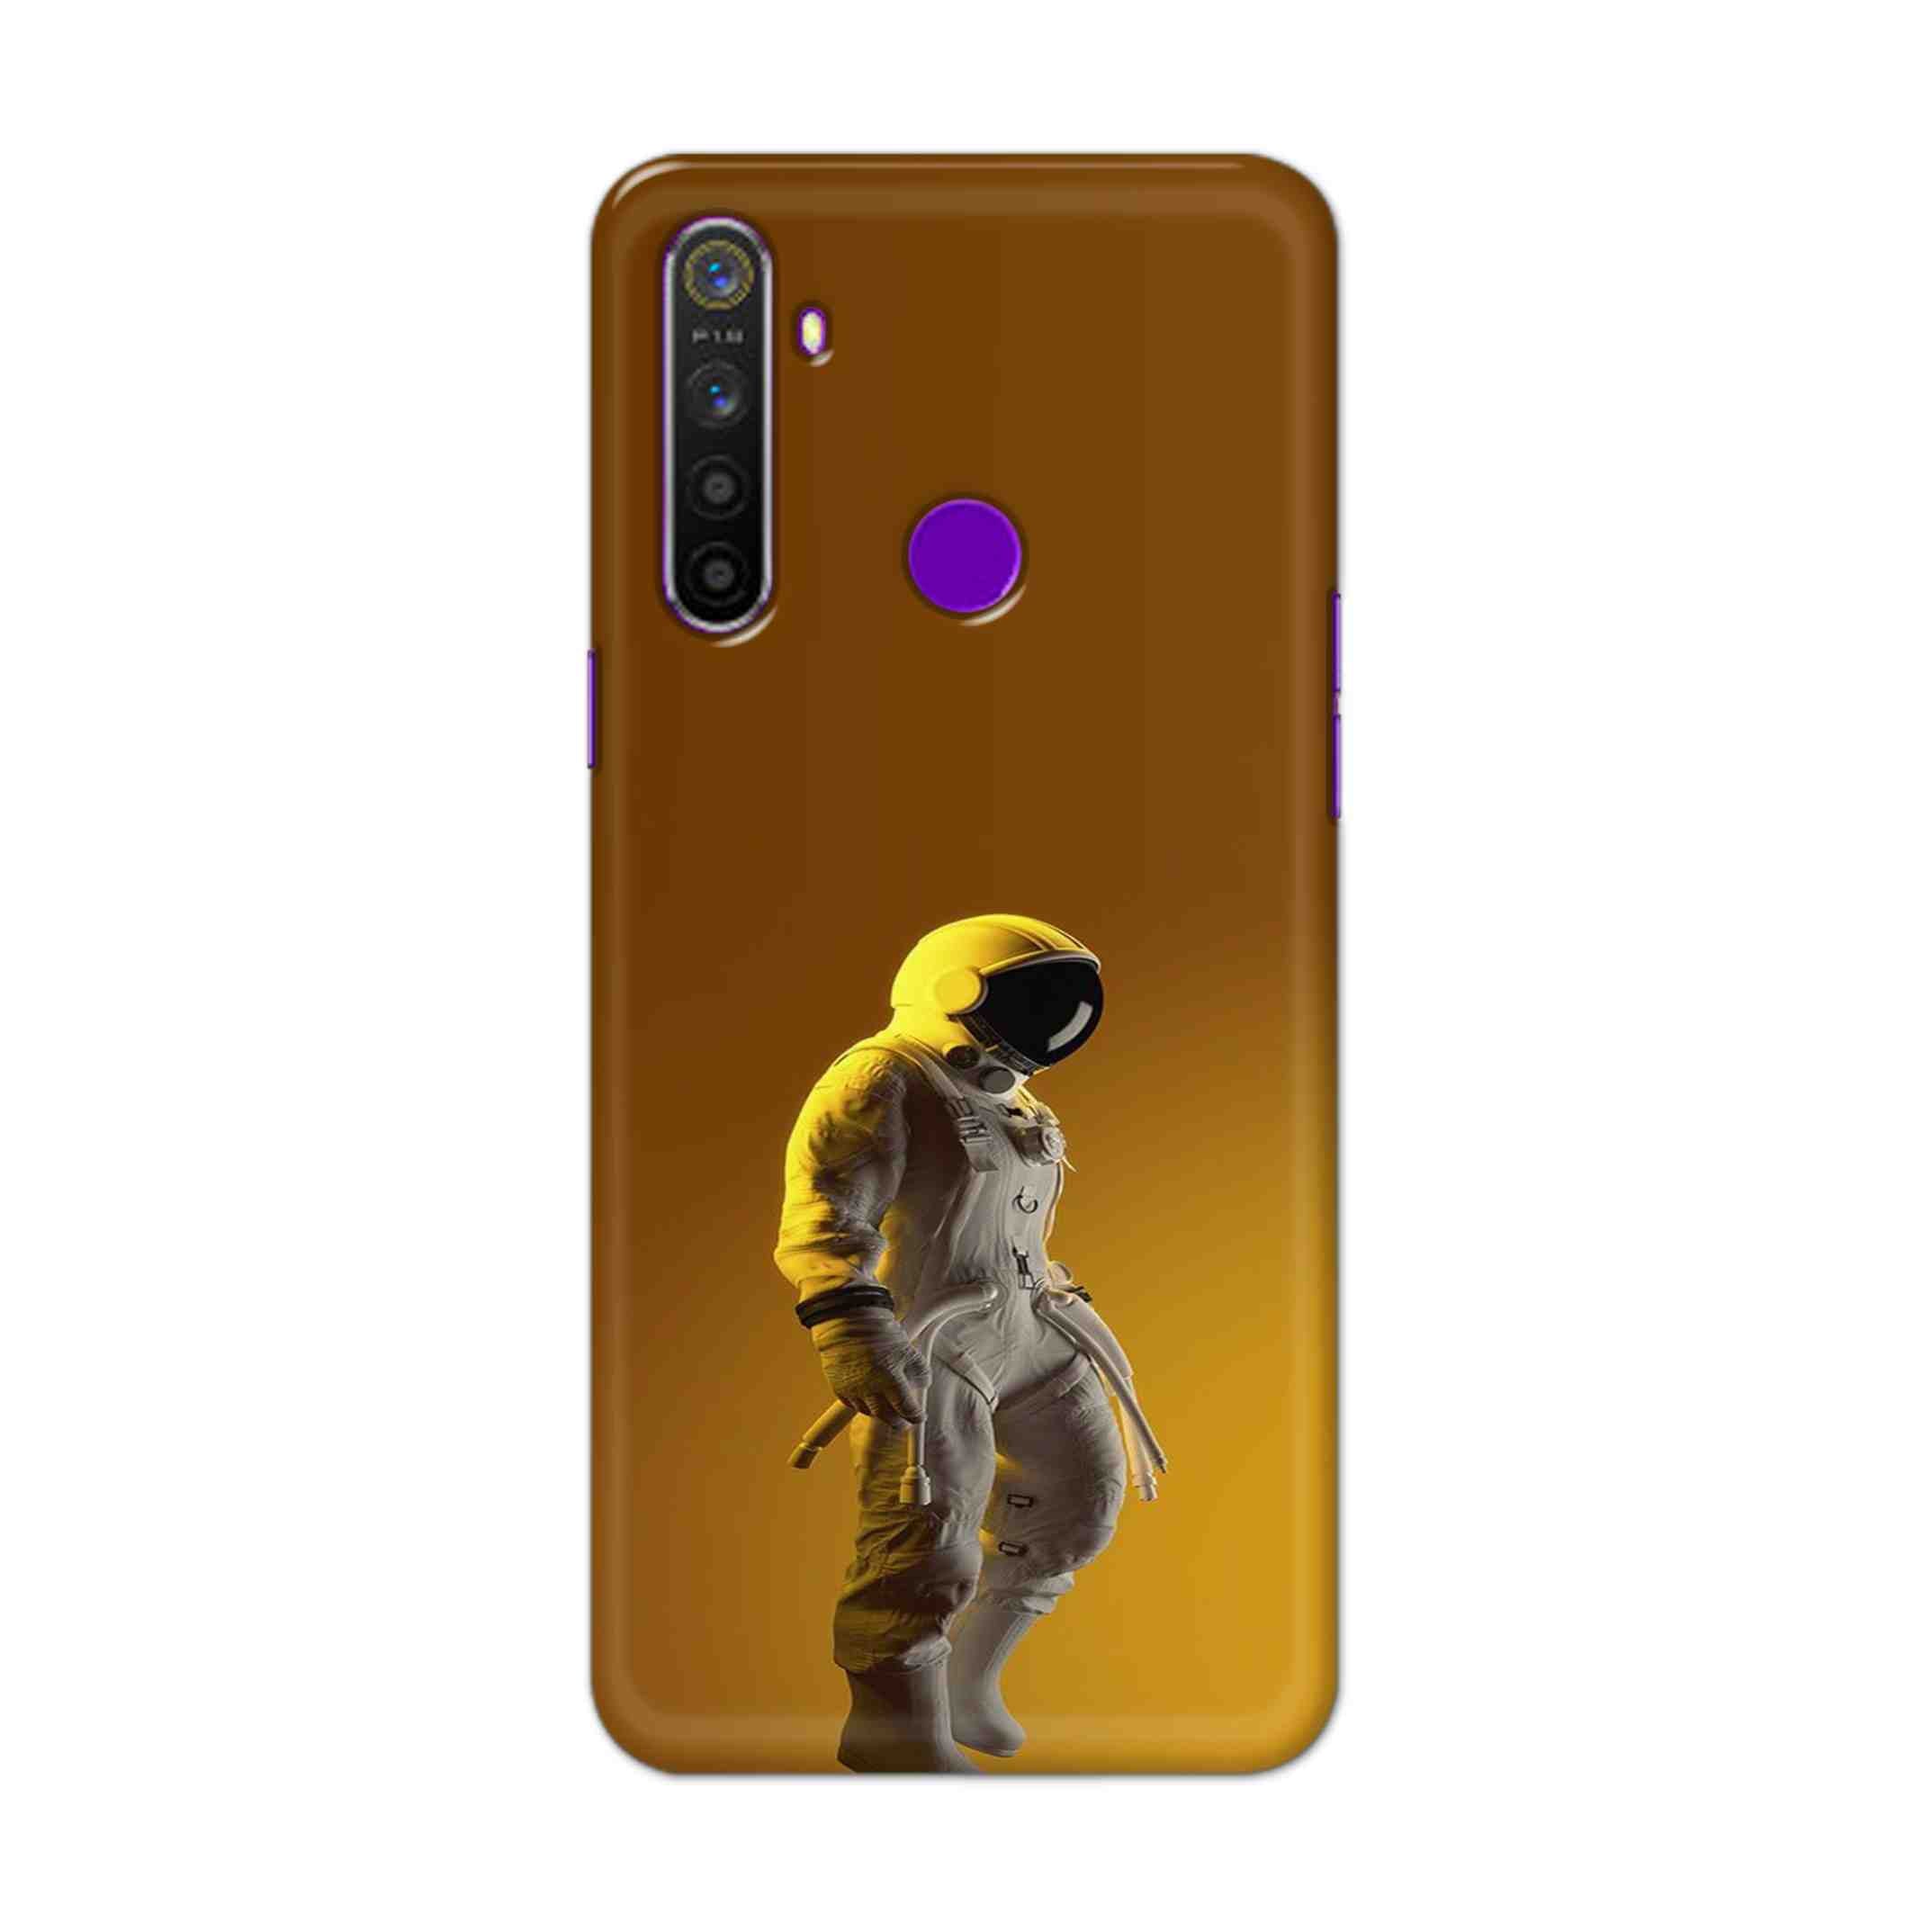 Buy Yellow Astronaut Hard Back Mobile Phone Case Cover For Realme 5 Online